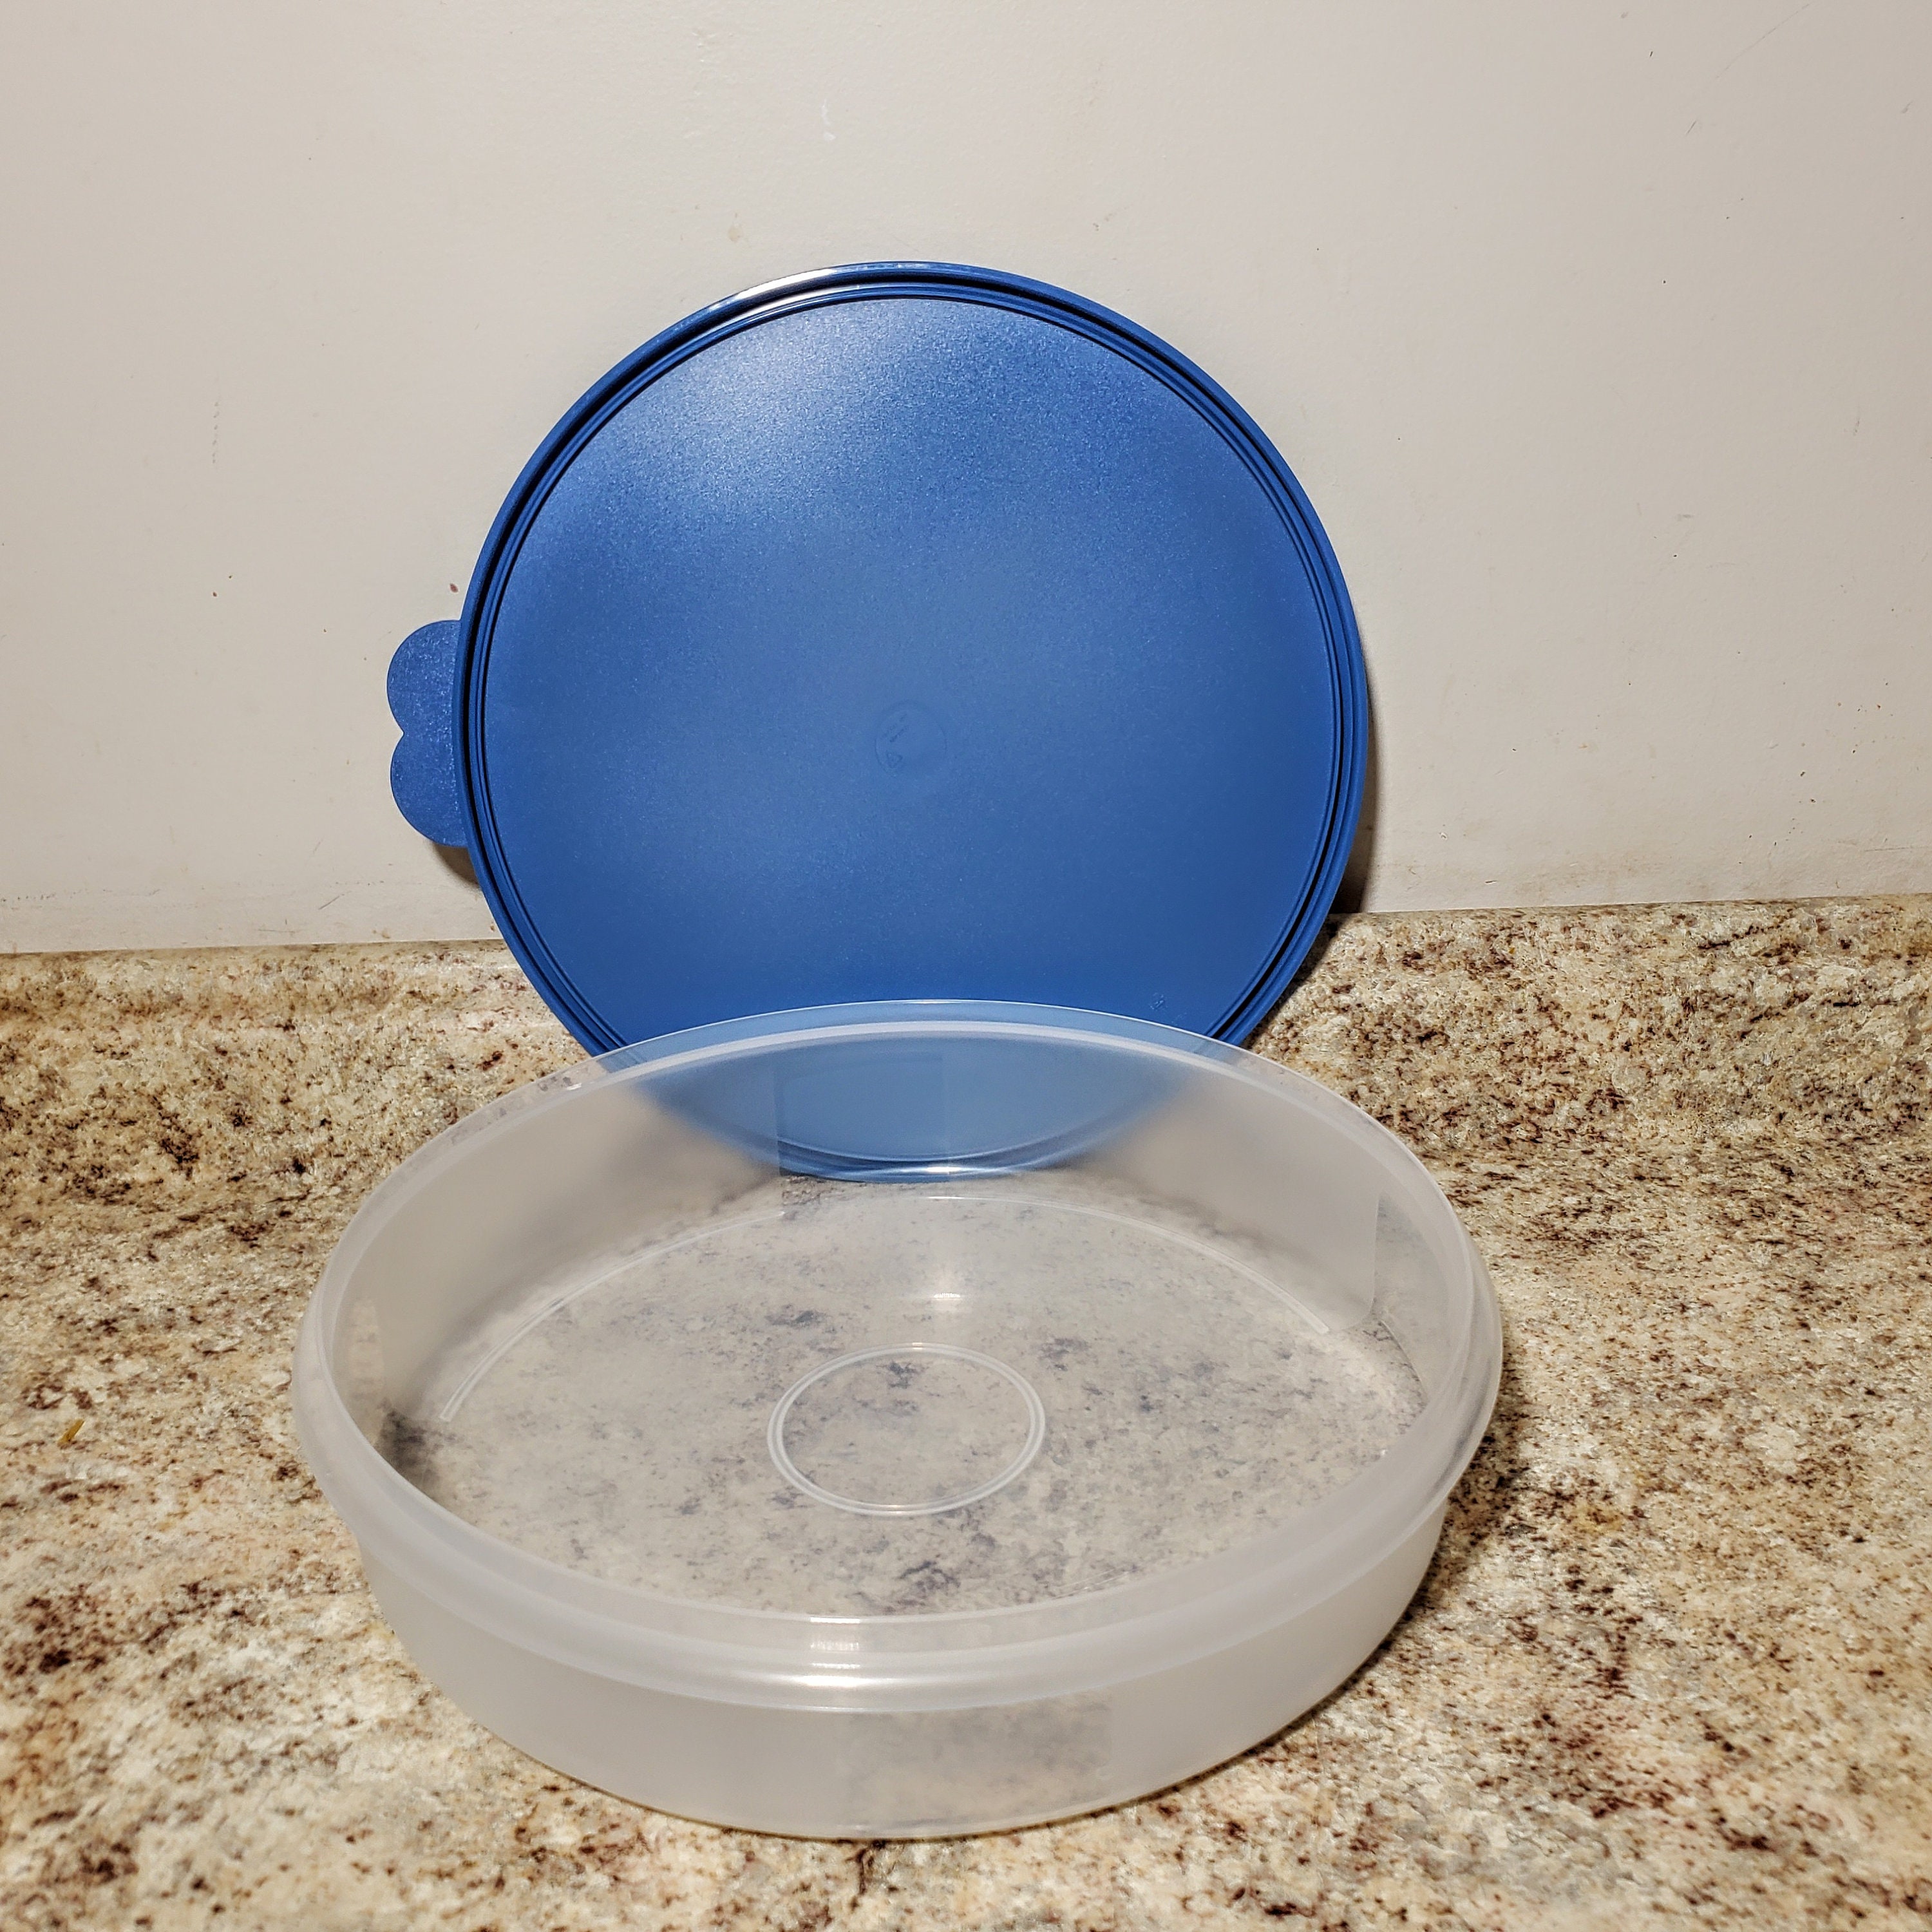 Tupperware Pizza PIE CUPCAKE 12in Round Keeper by SmileMore